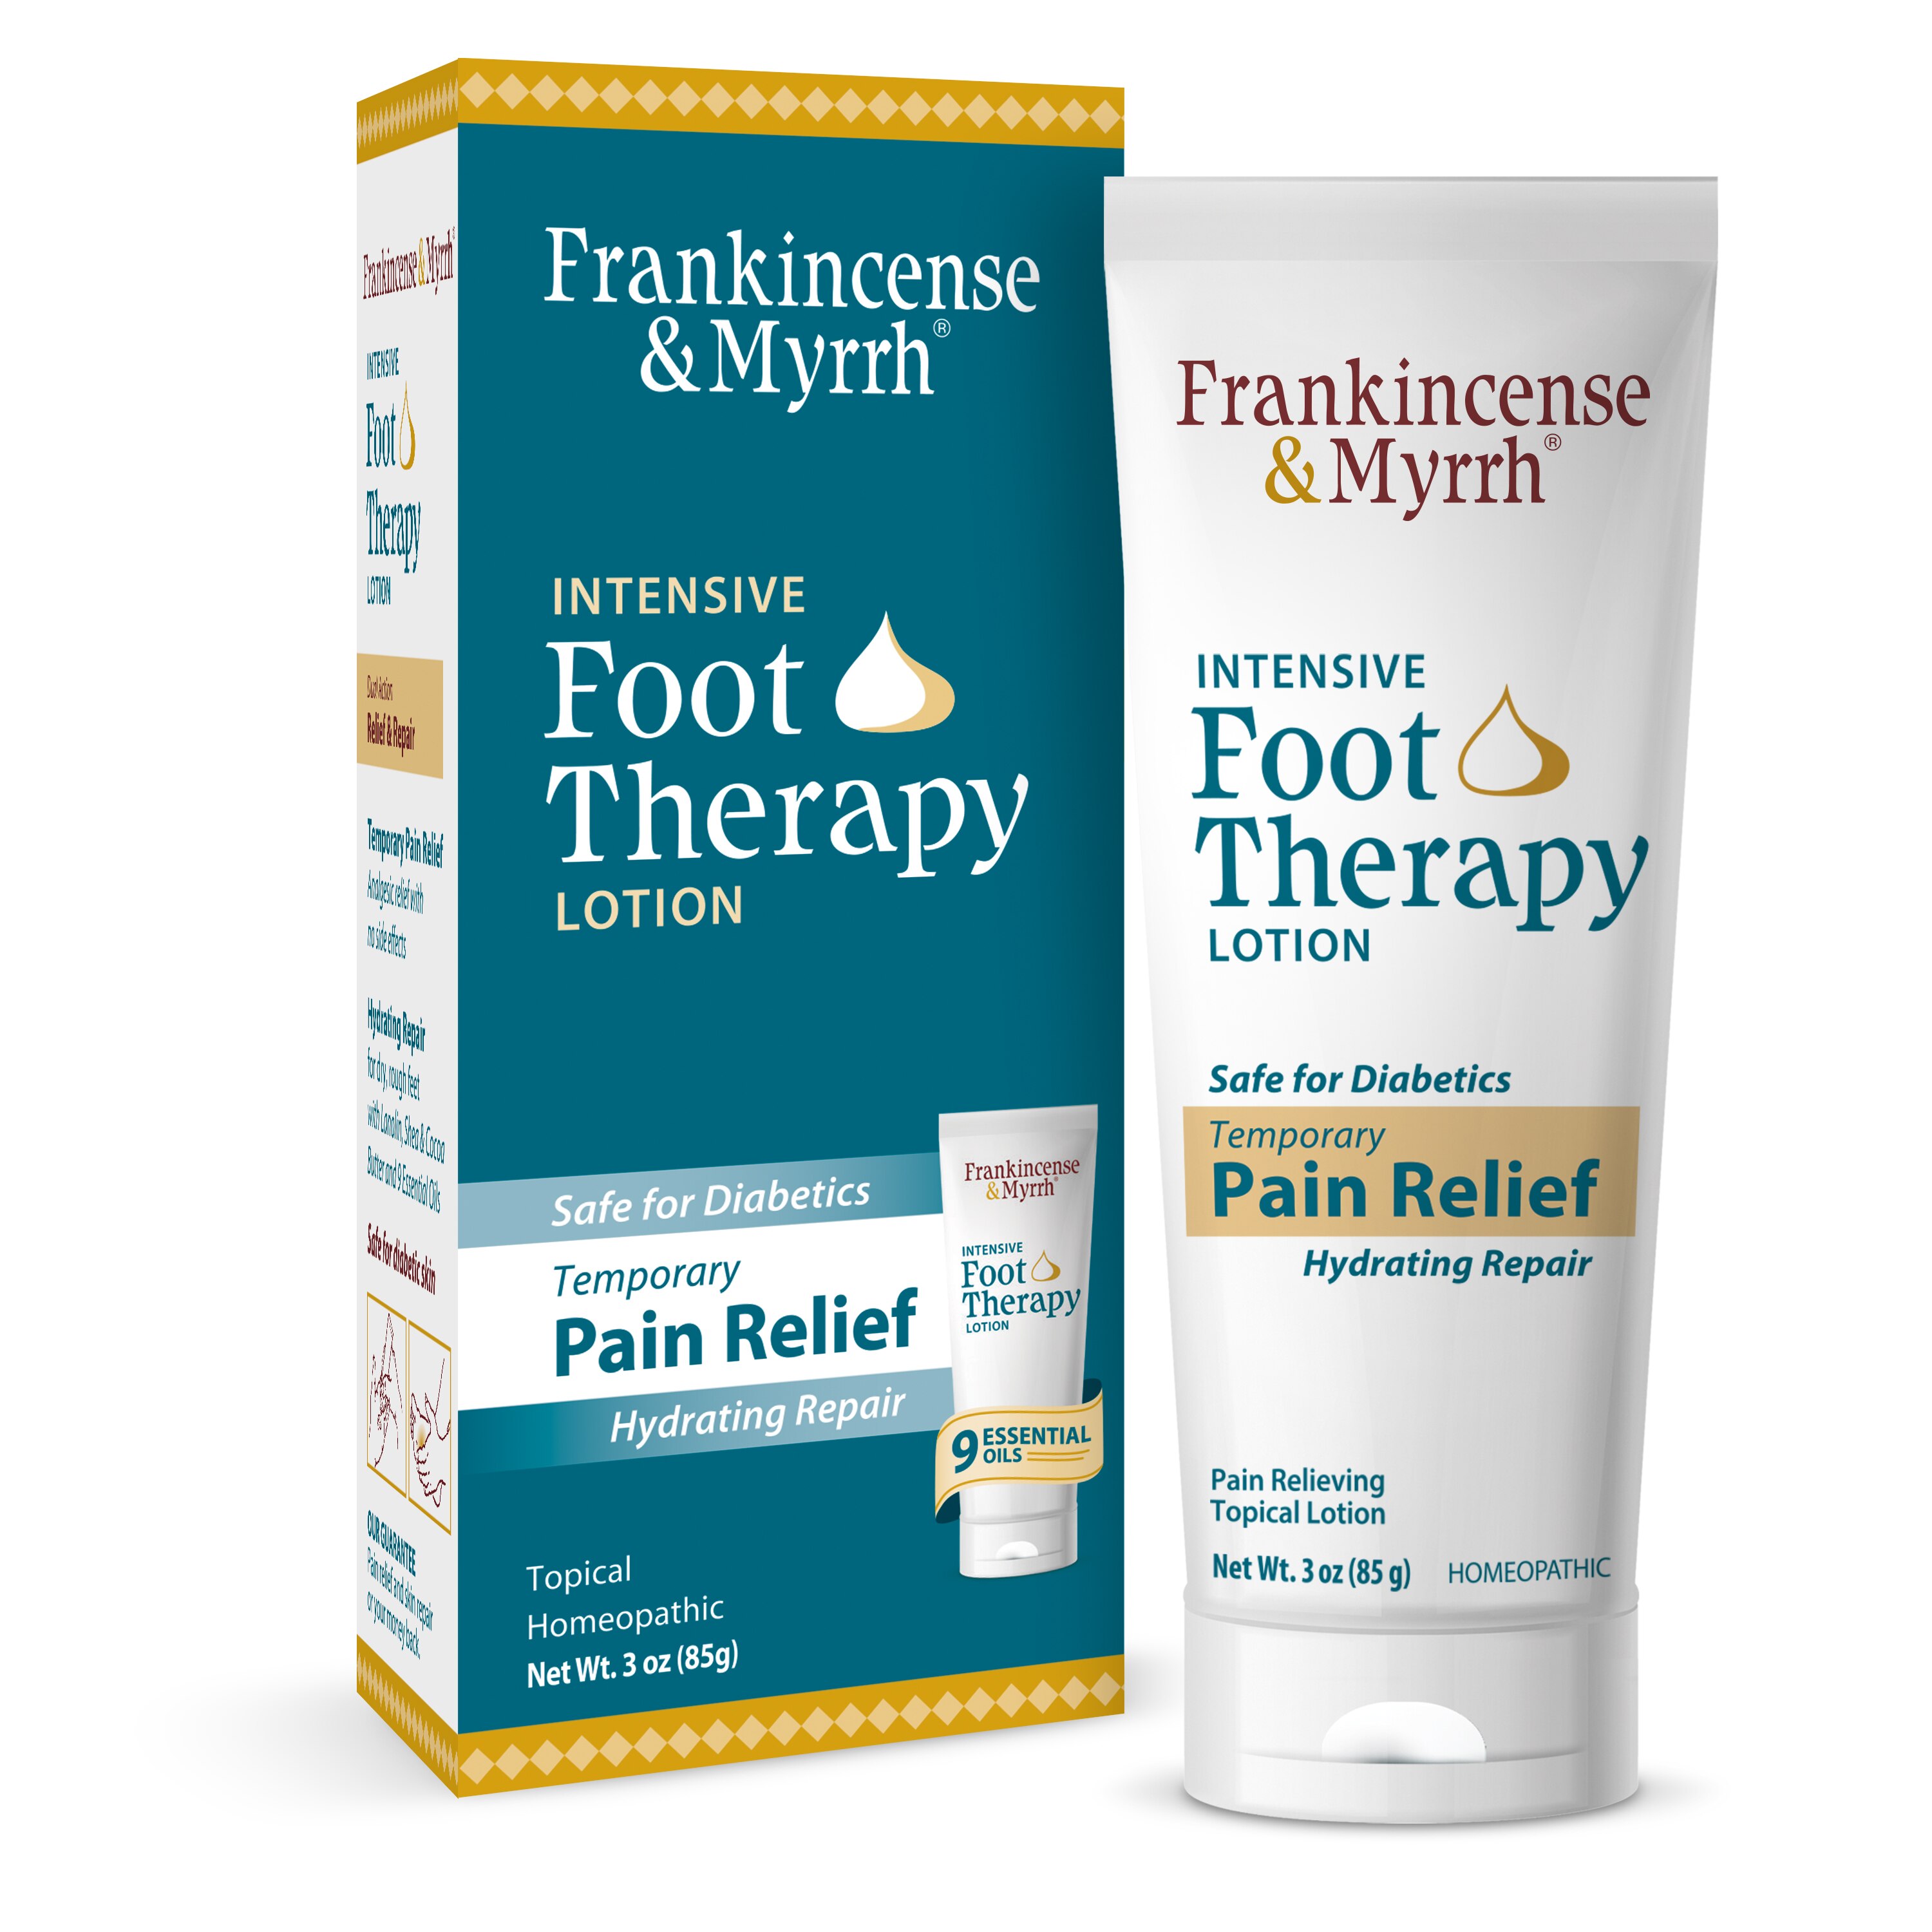 Frankincense & Myrrh Intensive Foot Therapy Lotion, 3 OZ